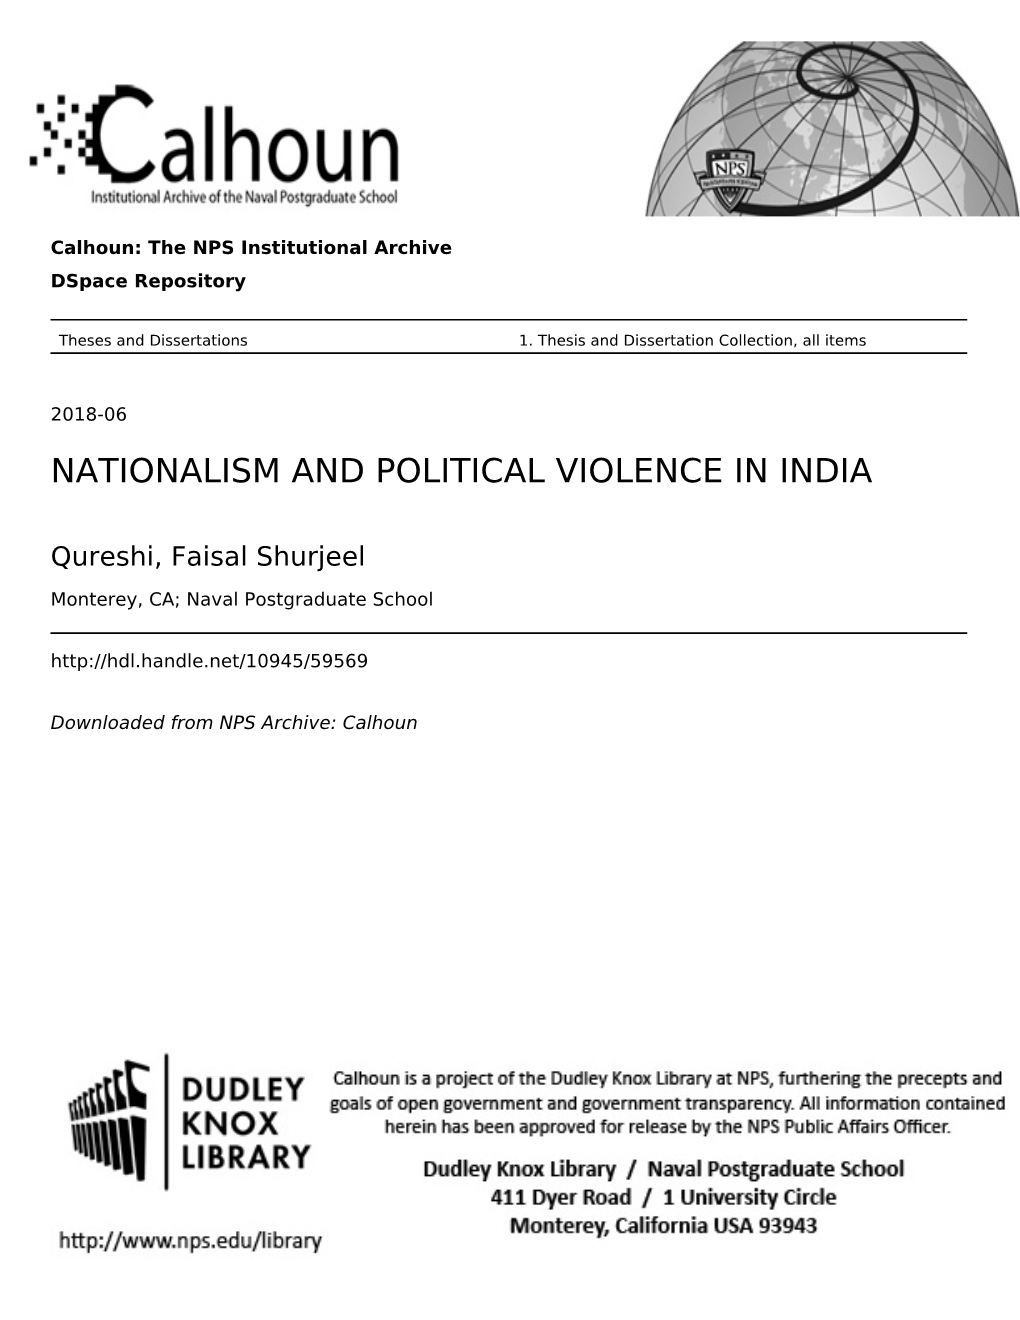 Nationalism and Political Violence in India